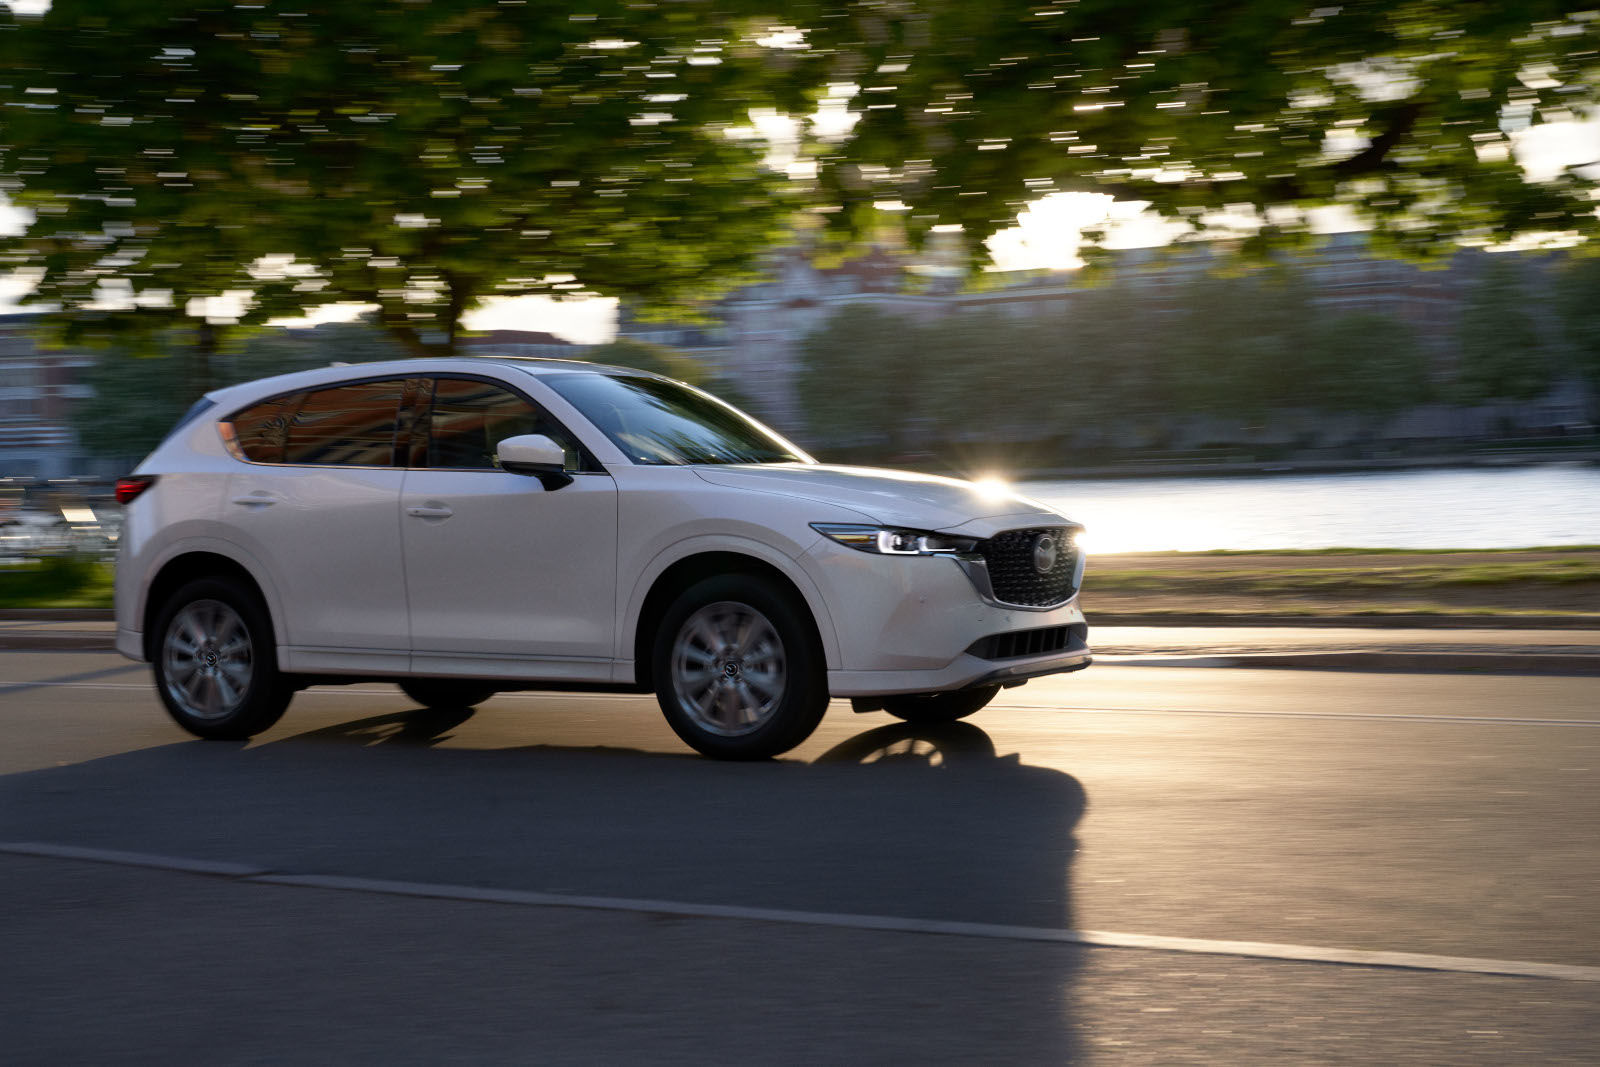 What There is to Know About Mazda Signature Models